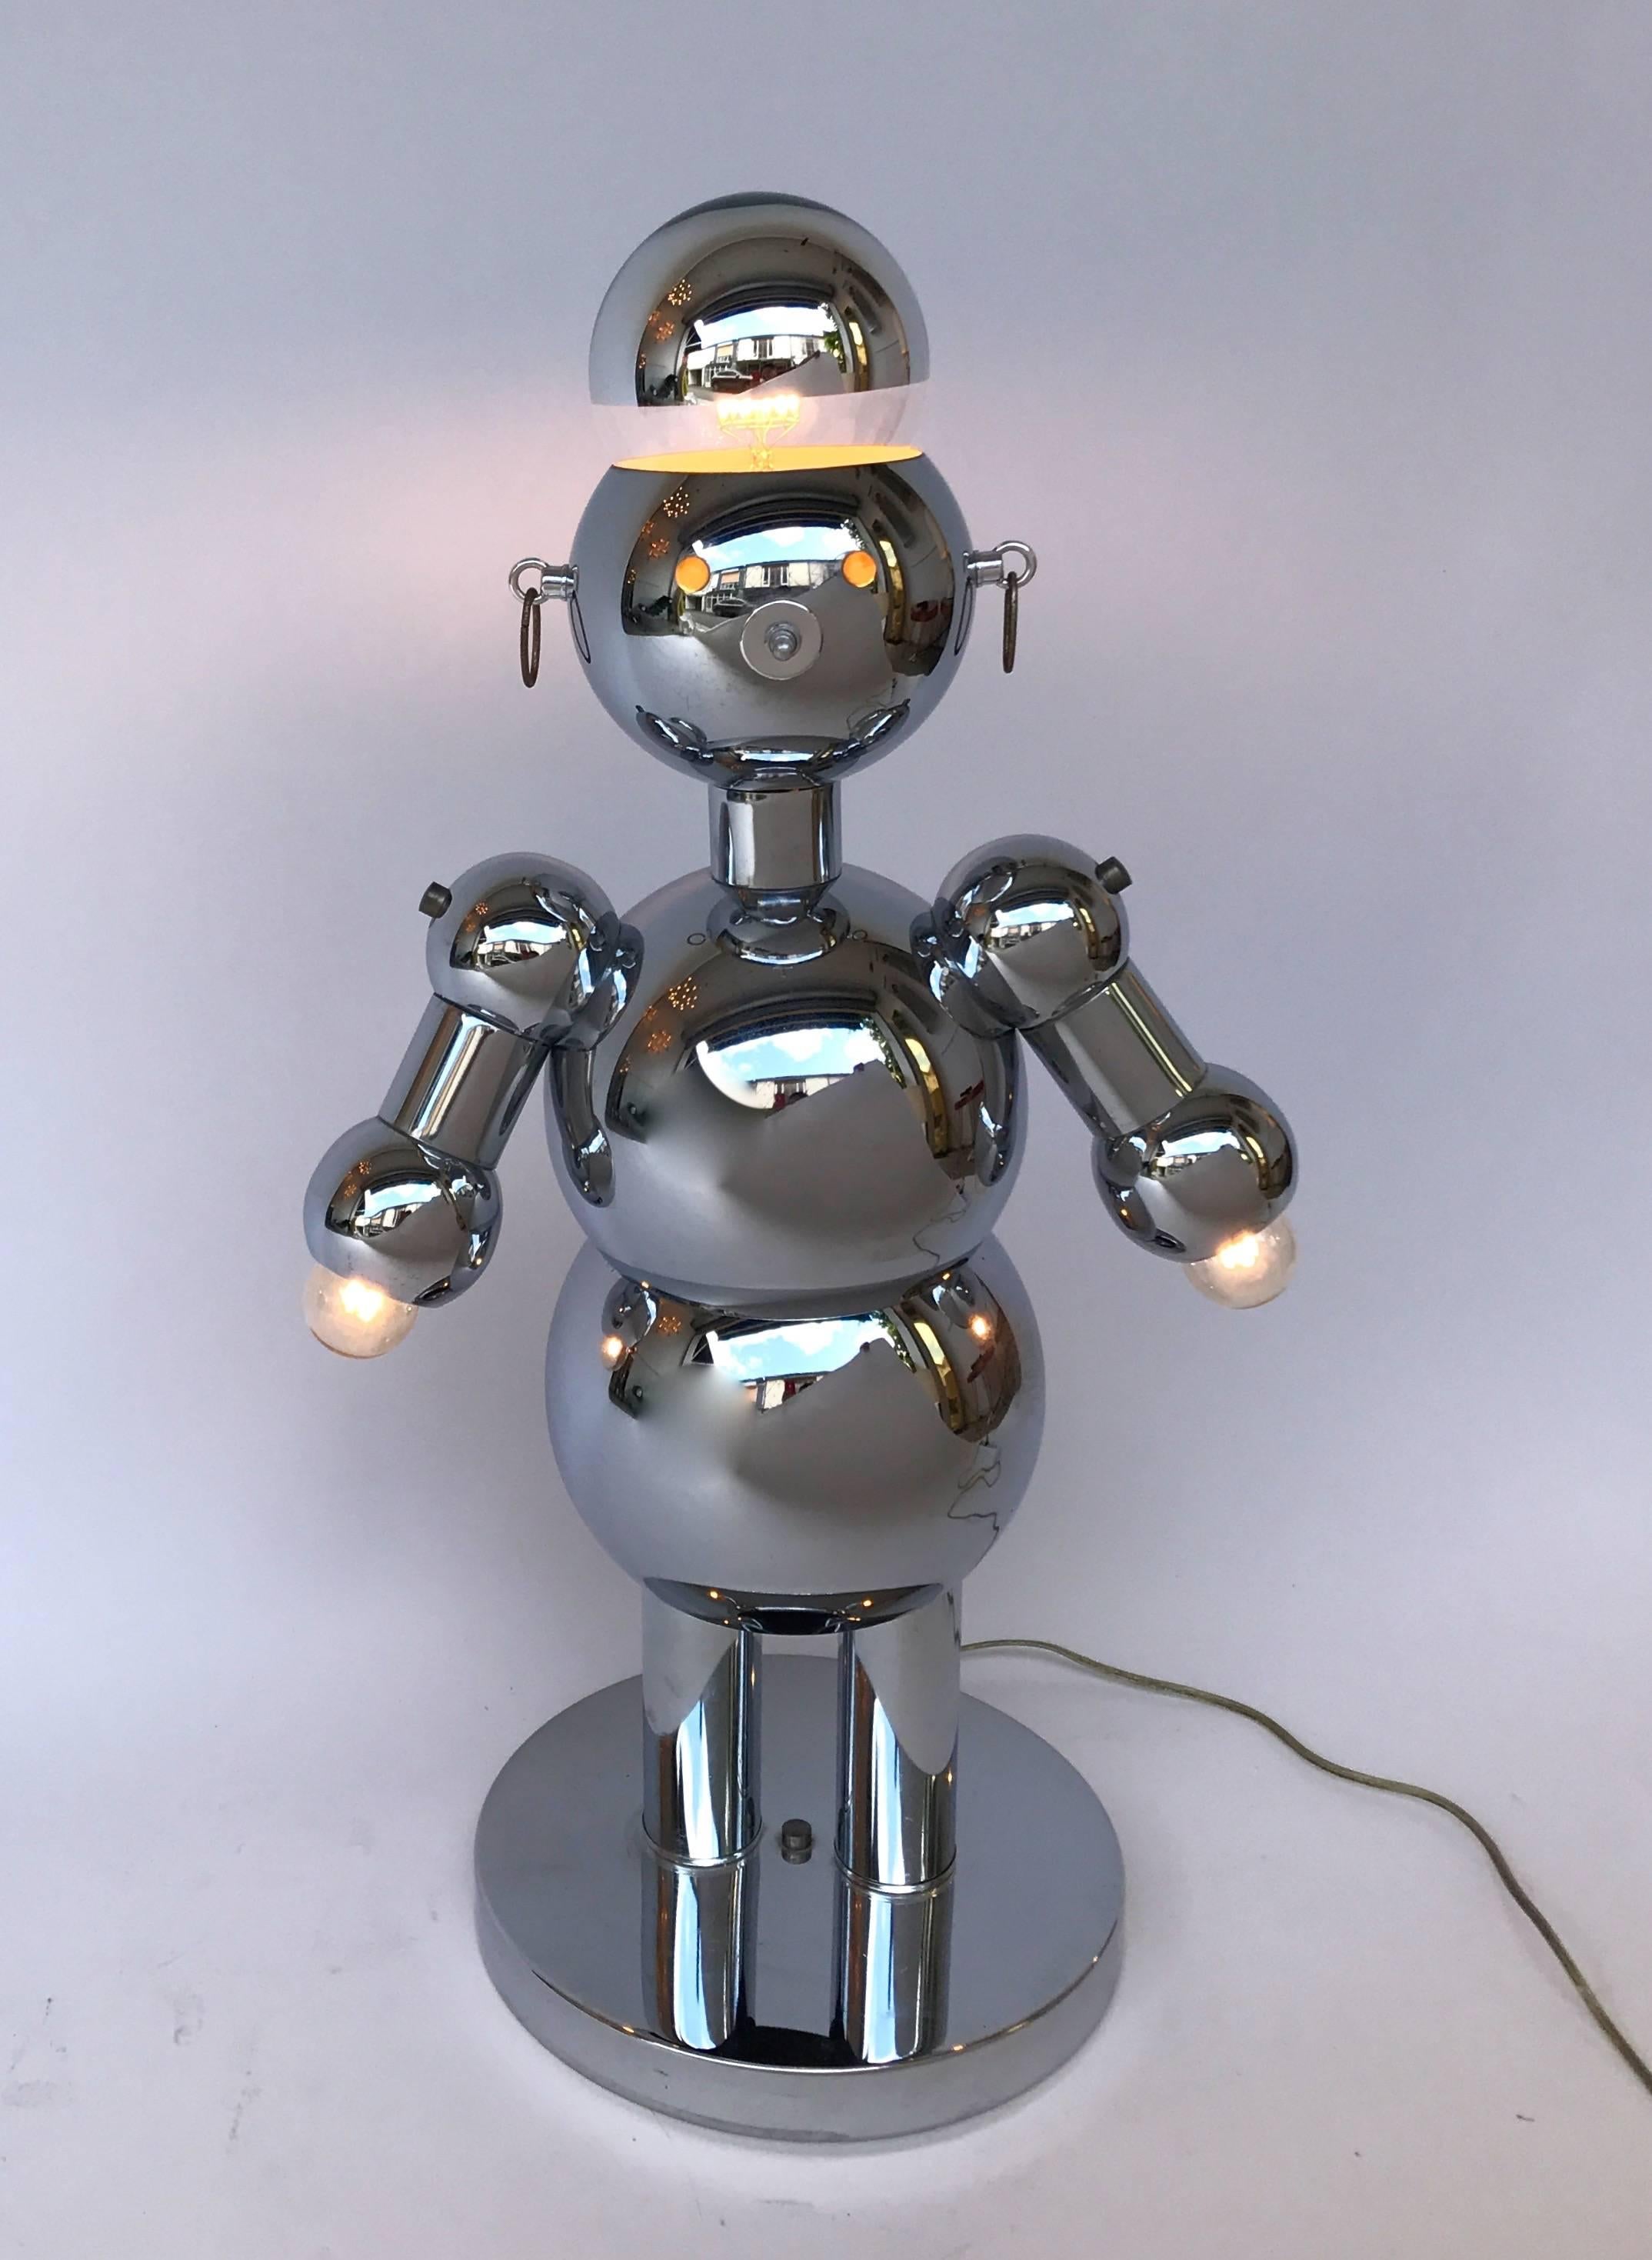 Spage Age female woman robot lamp by the editor Torino lamps from the collection The Robot Family. The nose is the switch light, three-light positions. Nice details like the earrings. Very excellent condition, the chrome is very shine. Famous editor